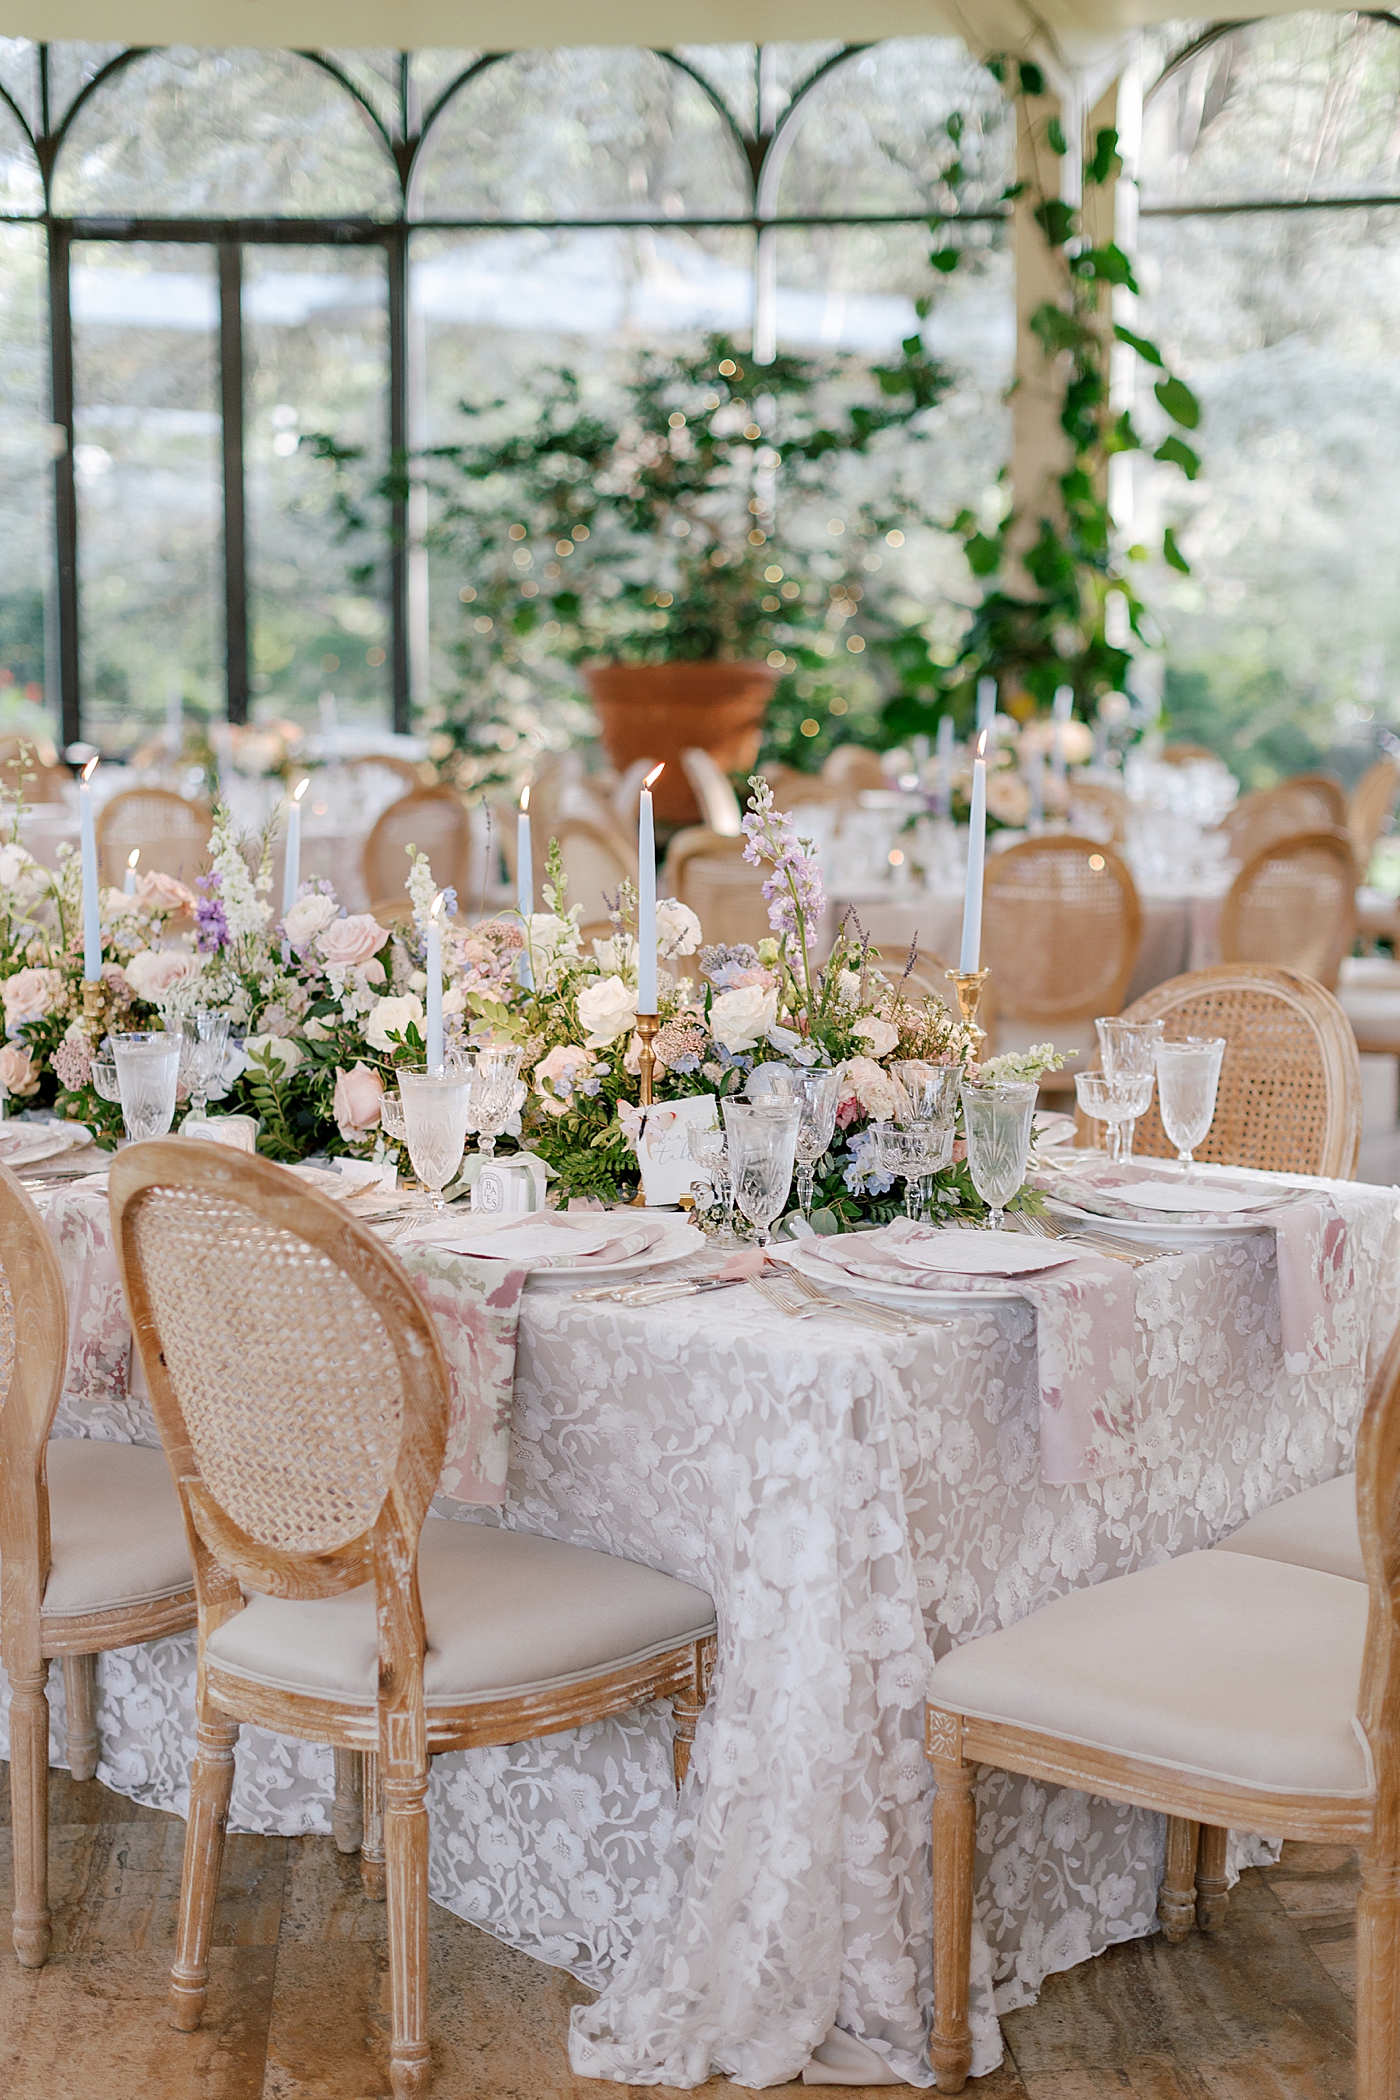 Reception table with flowers and tapered candles | Image by Hope Helmuth Photography